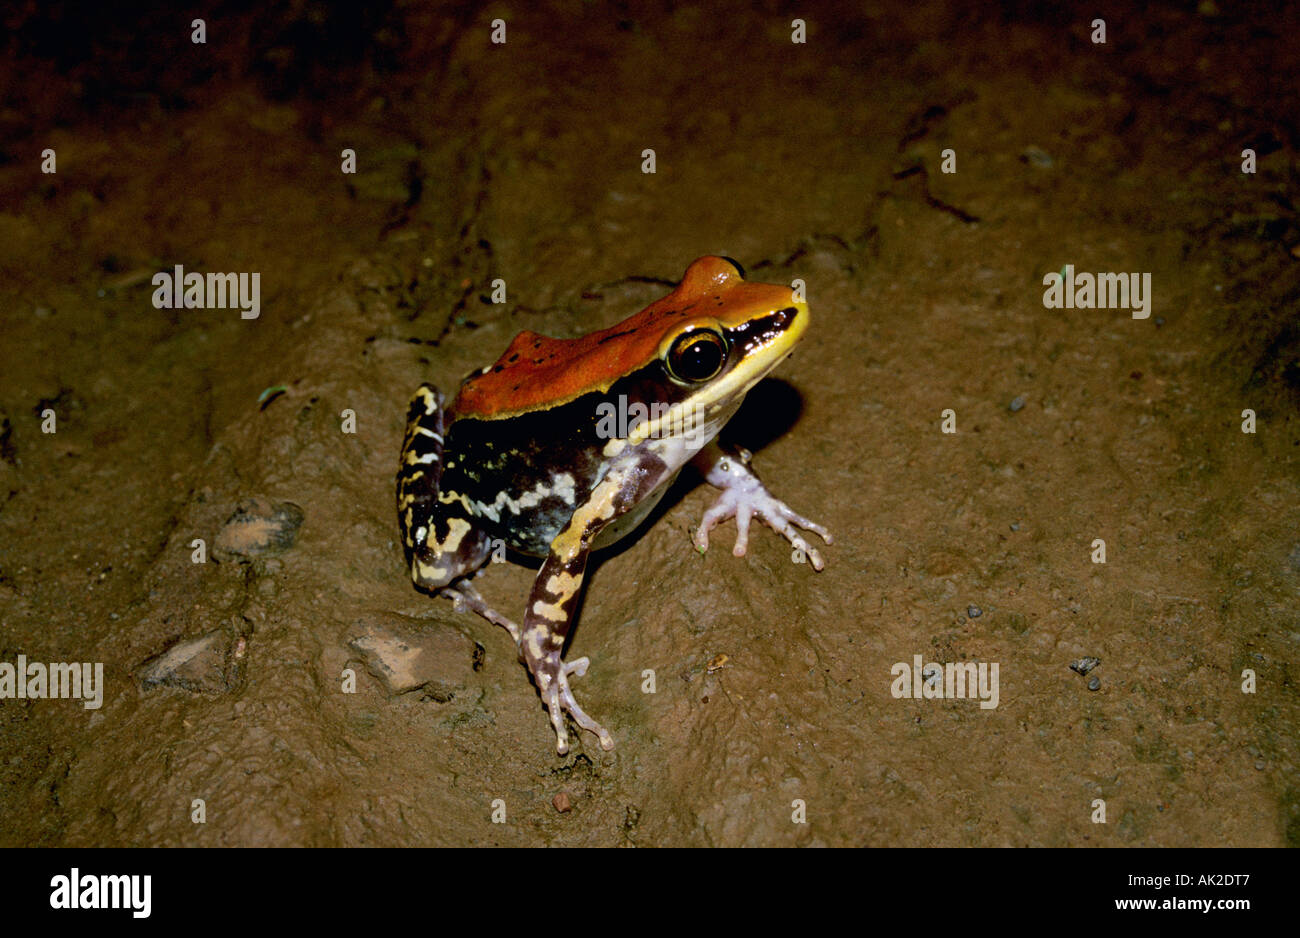 Rana, malbarica fungoid grenouille. Chiplun, Maharasthra, Inde Banque D'Images